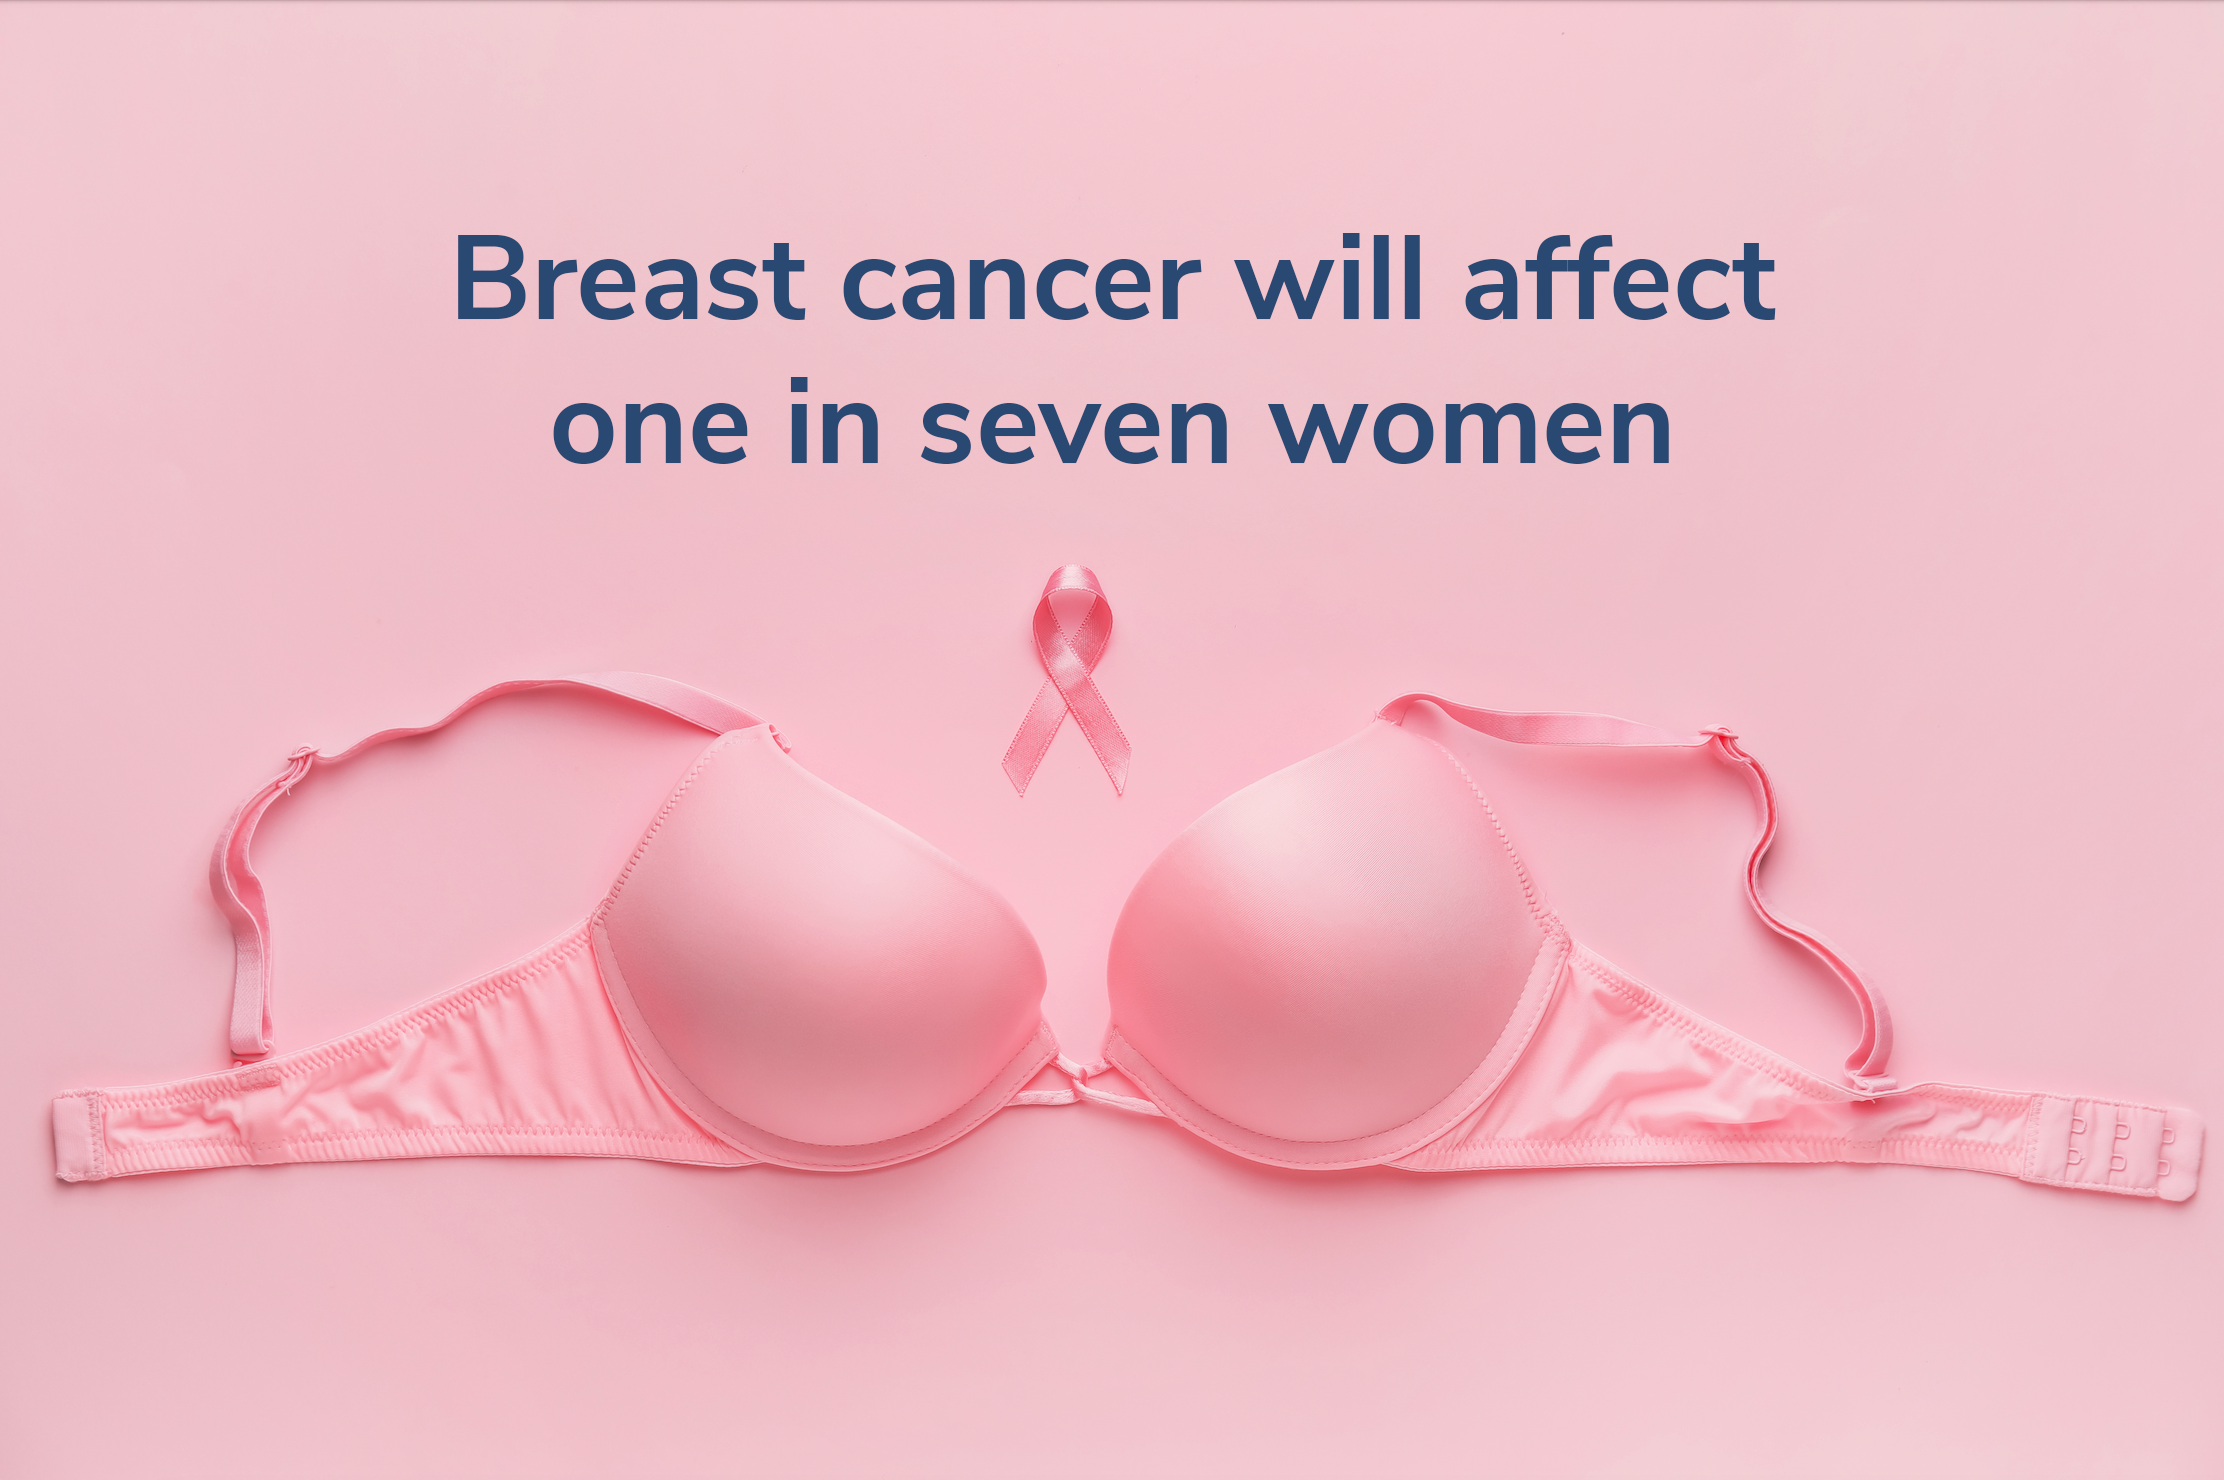 What are the signs of breast cancer?